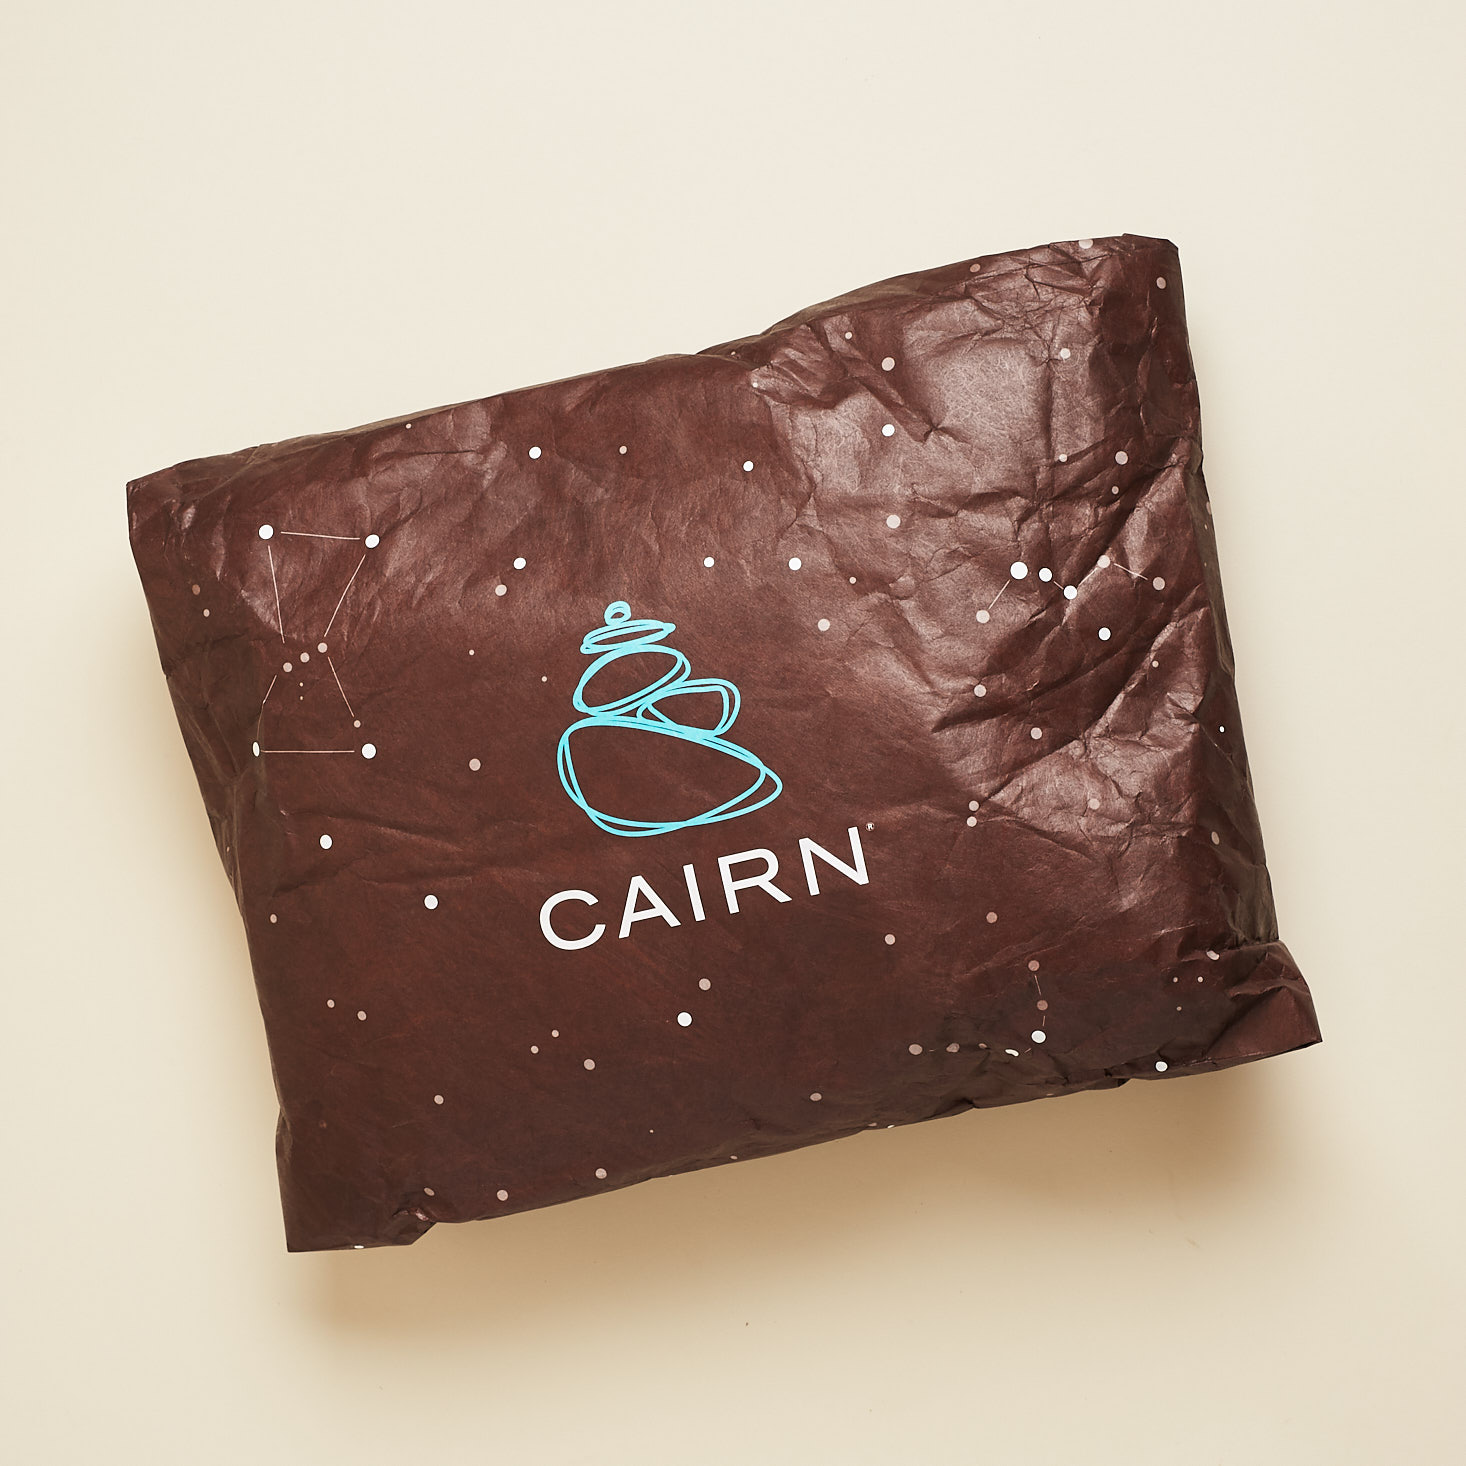 Cairn Outdoor Subscription Review + Coupon – April 2018